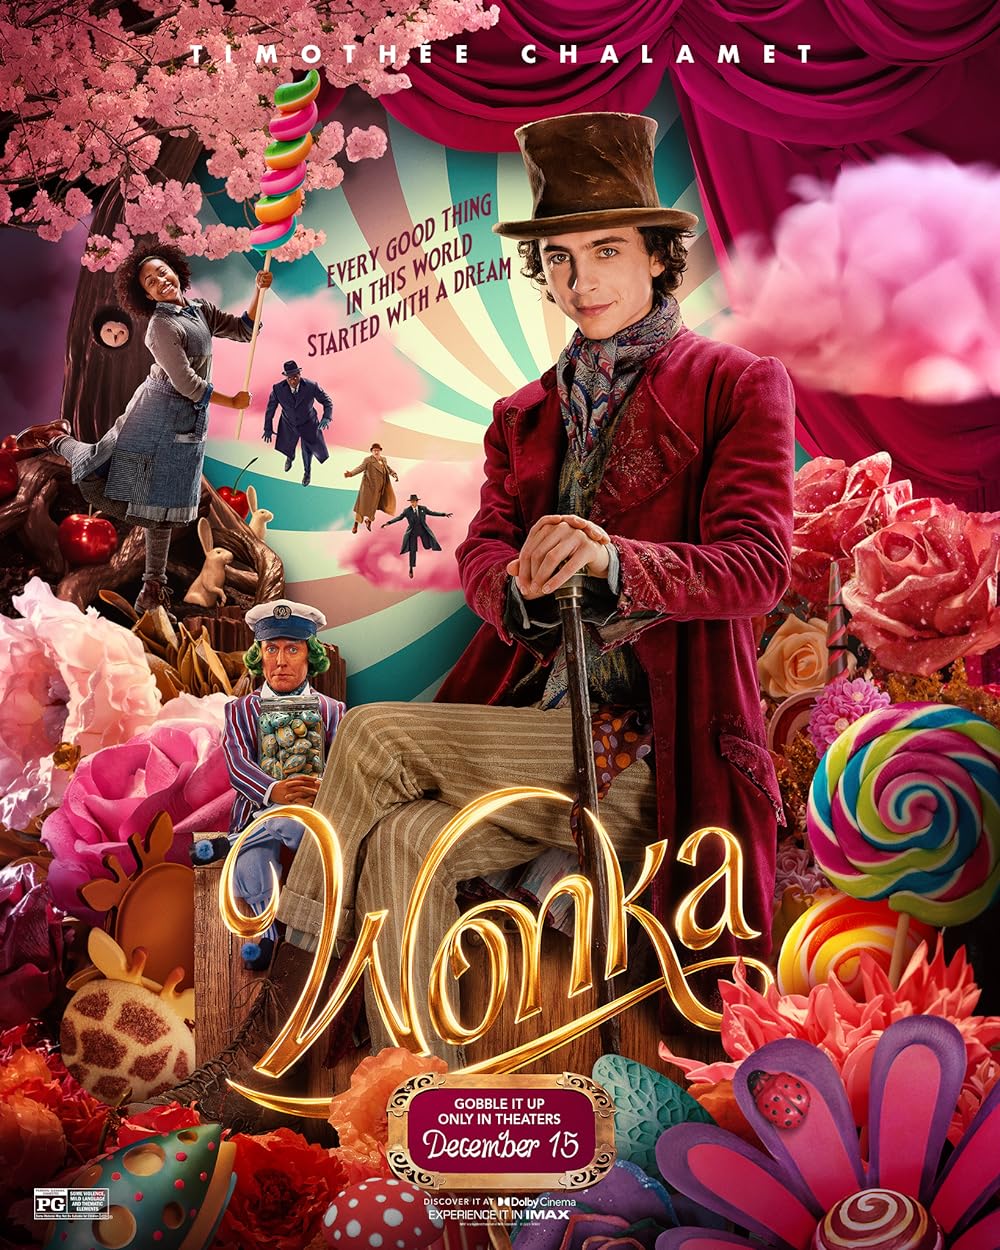 Wonka (January 22) - Available to buy and rent on BookMyShow StreamWonka is a musical fantasy adventure delving into the origins of the world’s most famous chocolatier, Willy Wonka, portrayed by Timothée Chalamet. The plot explores Wonka's journey as he arrives in Europe to realize his dream of opening a chocolate shop. Facing financial hardships, he finds an unlikely ally in Noodle (Calah Lane), an orphan. Together, they confront a ruthless Chocolate Cartel controlling the city’s chocolate trade.